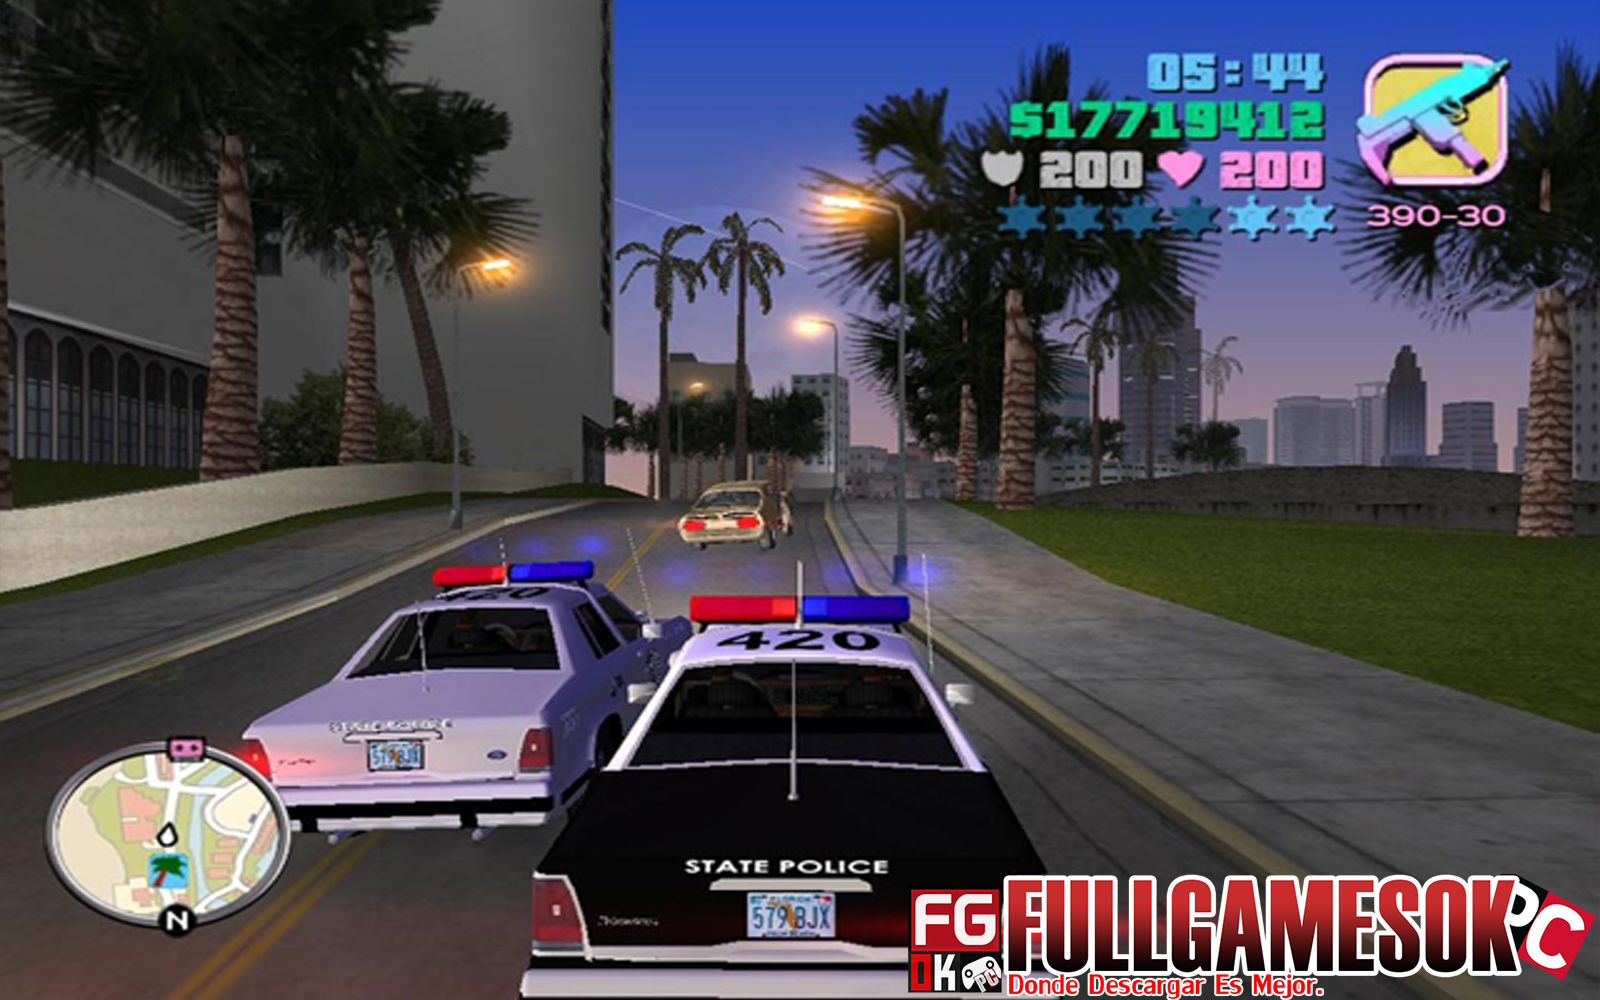 Vc play. Grand Theft auto vice City Deluxe. GTA / Grand Theft auto: vice City (2003). GTA вай Сити Делюкс. Grand Theft auto Вайс Сити Делюкс.